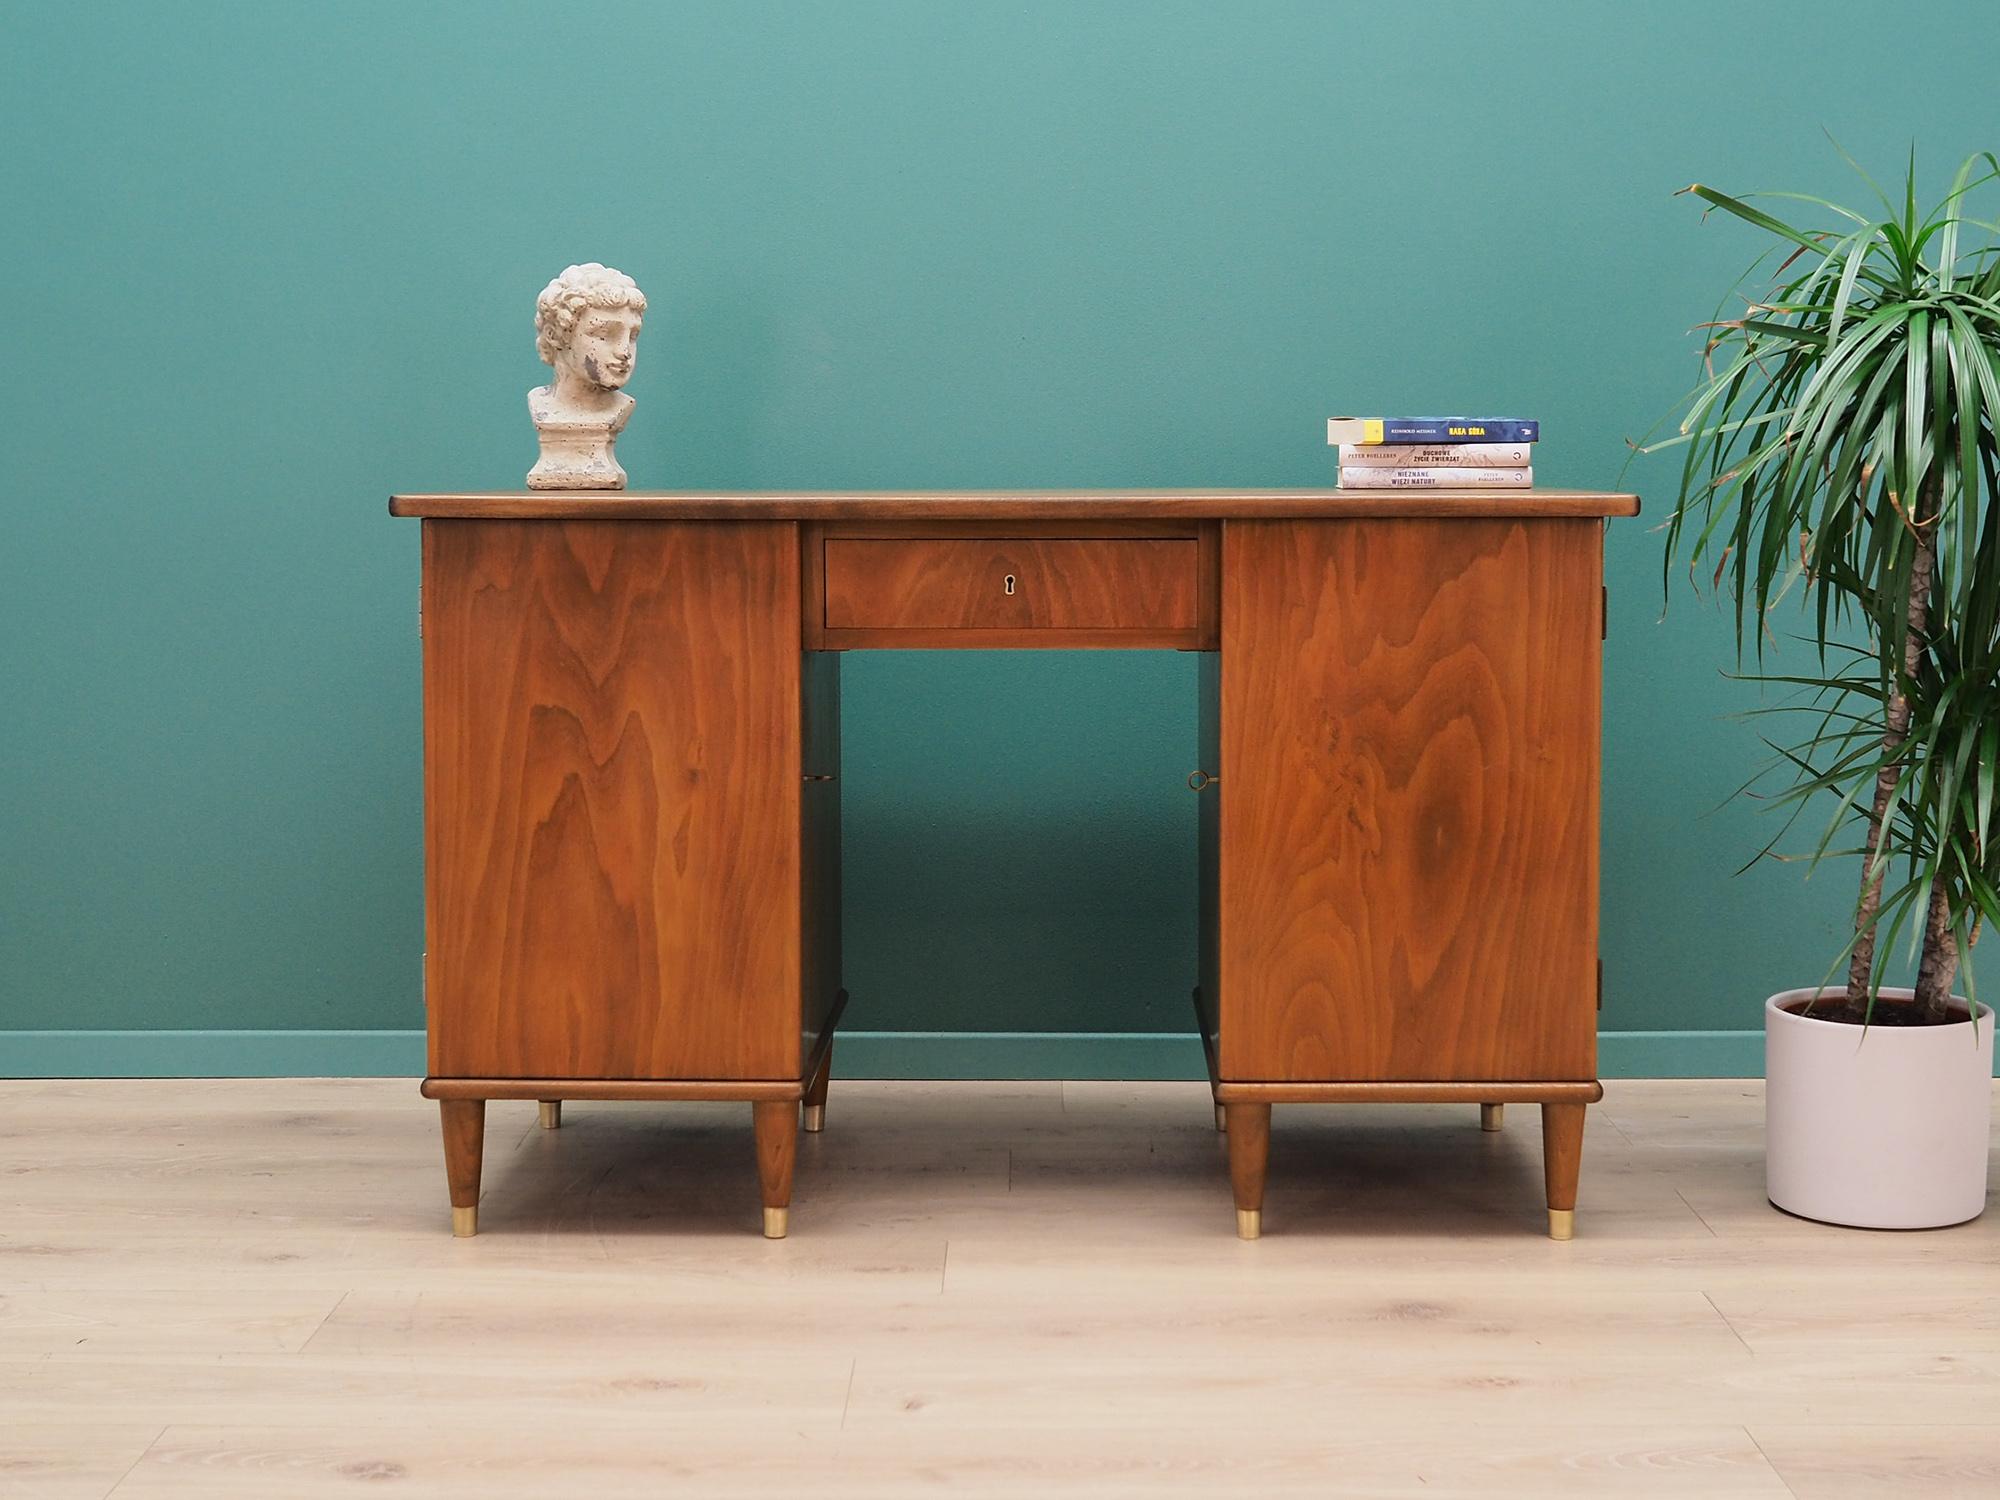 Desk made in the 1960s, Danish production.

Structure and top are covered with walnut veneer. Legs are made of solid walnut wood, perfectly integrated into the structure of the desk. The surface after refreshing. From the front, the desk has one